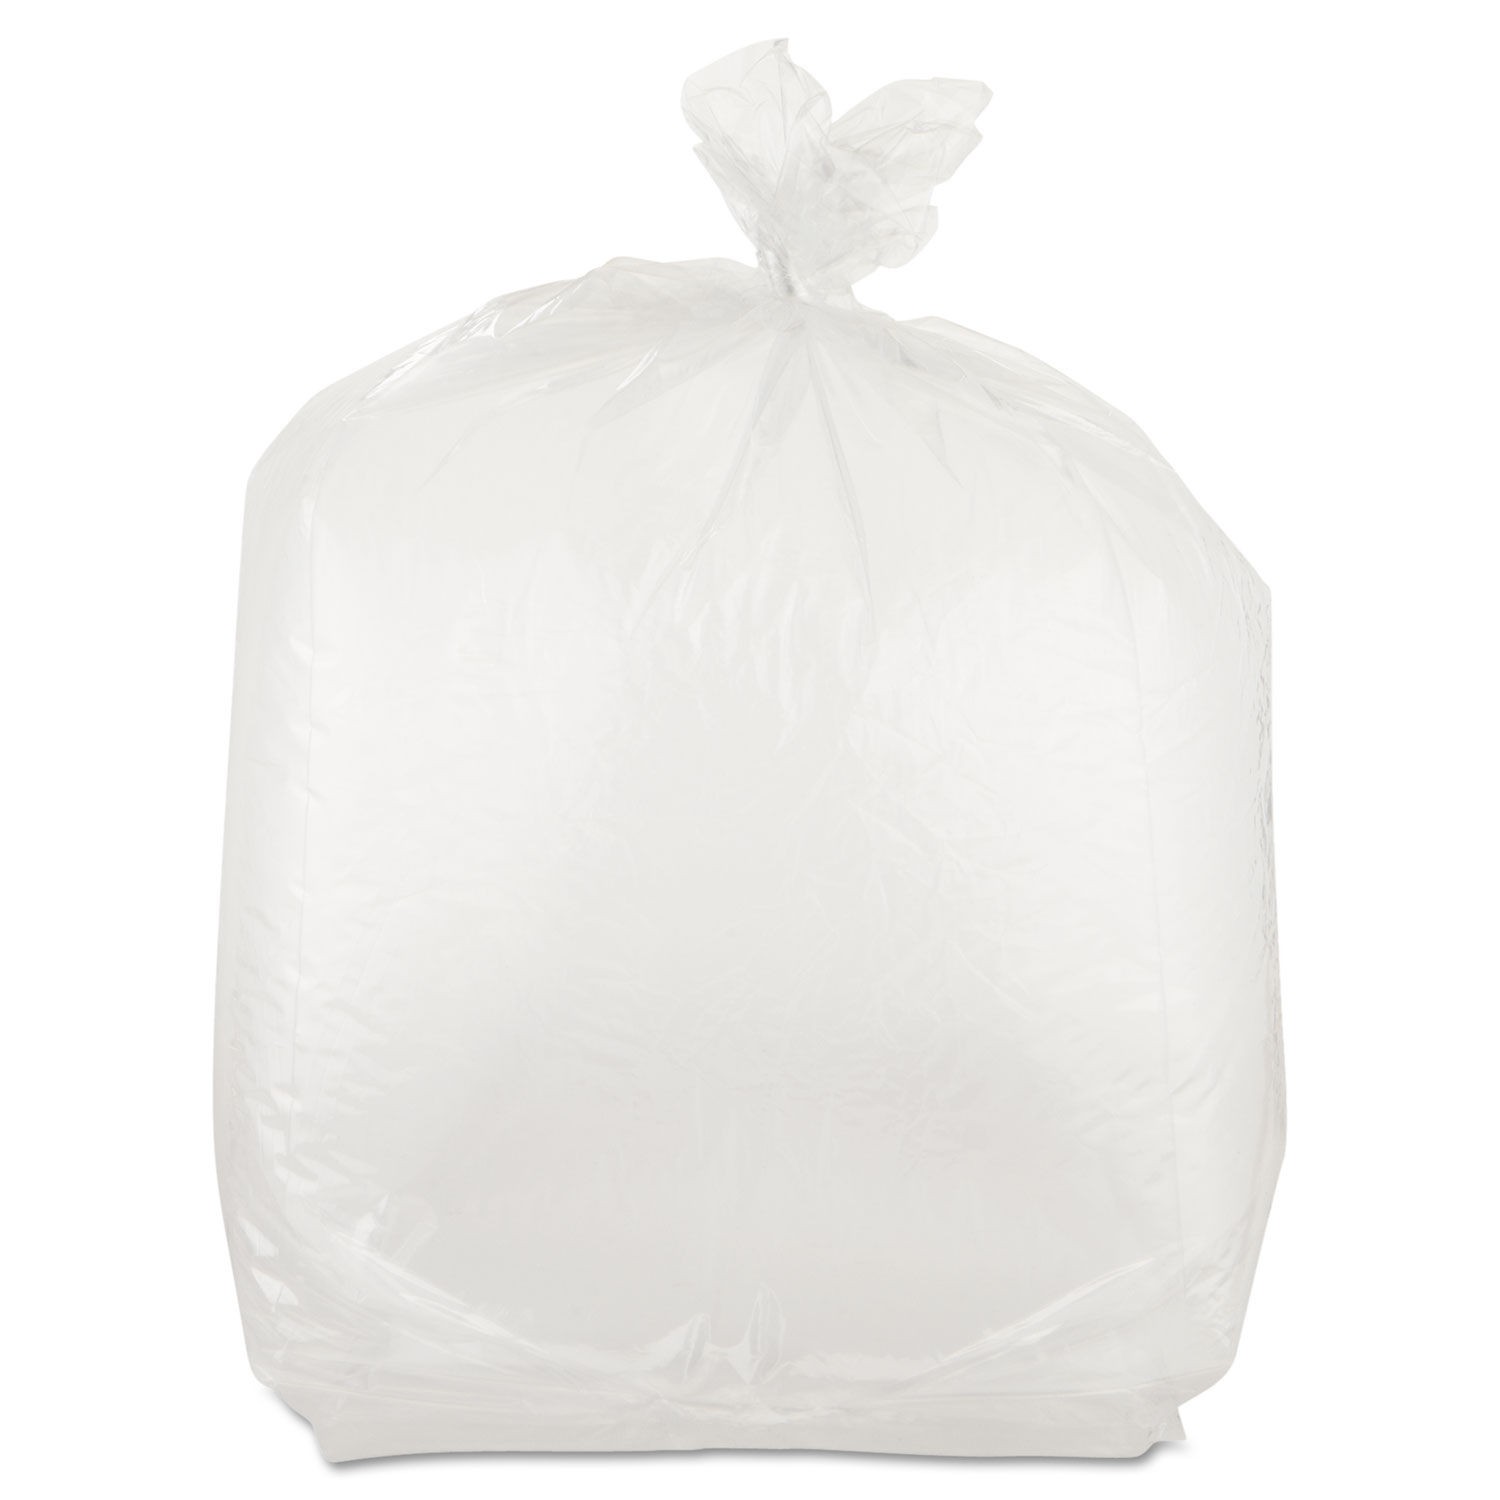 Large Resealable Plastic Food Bags